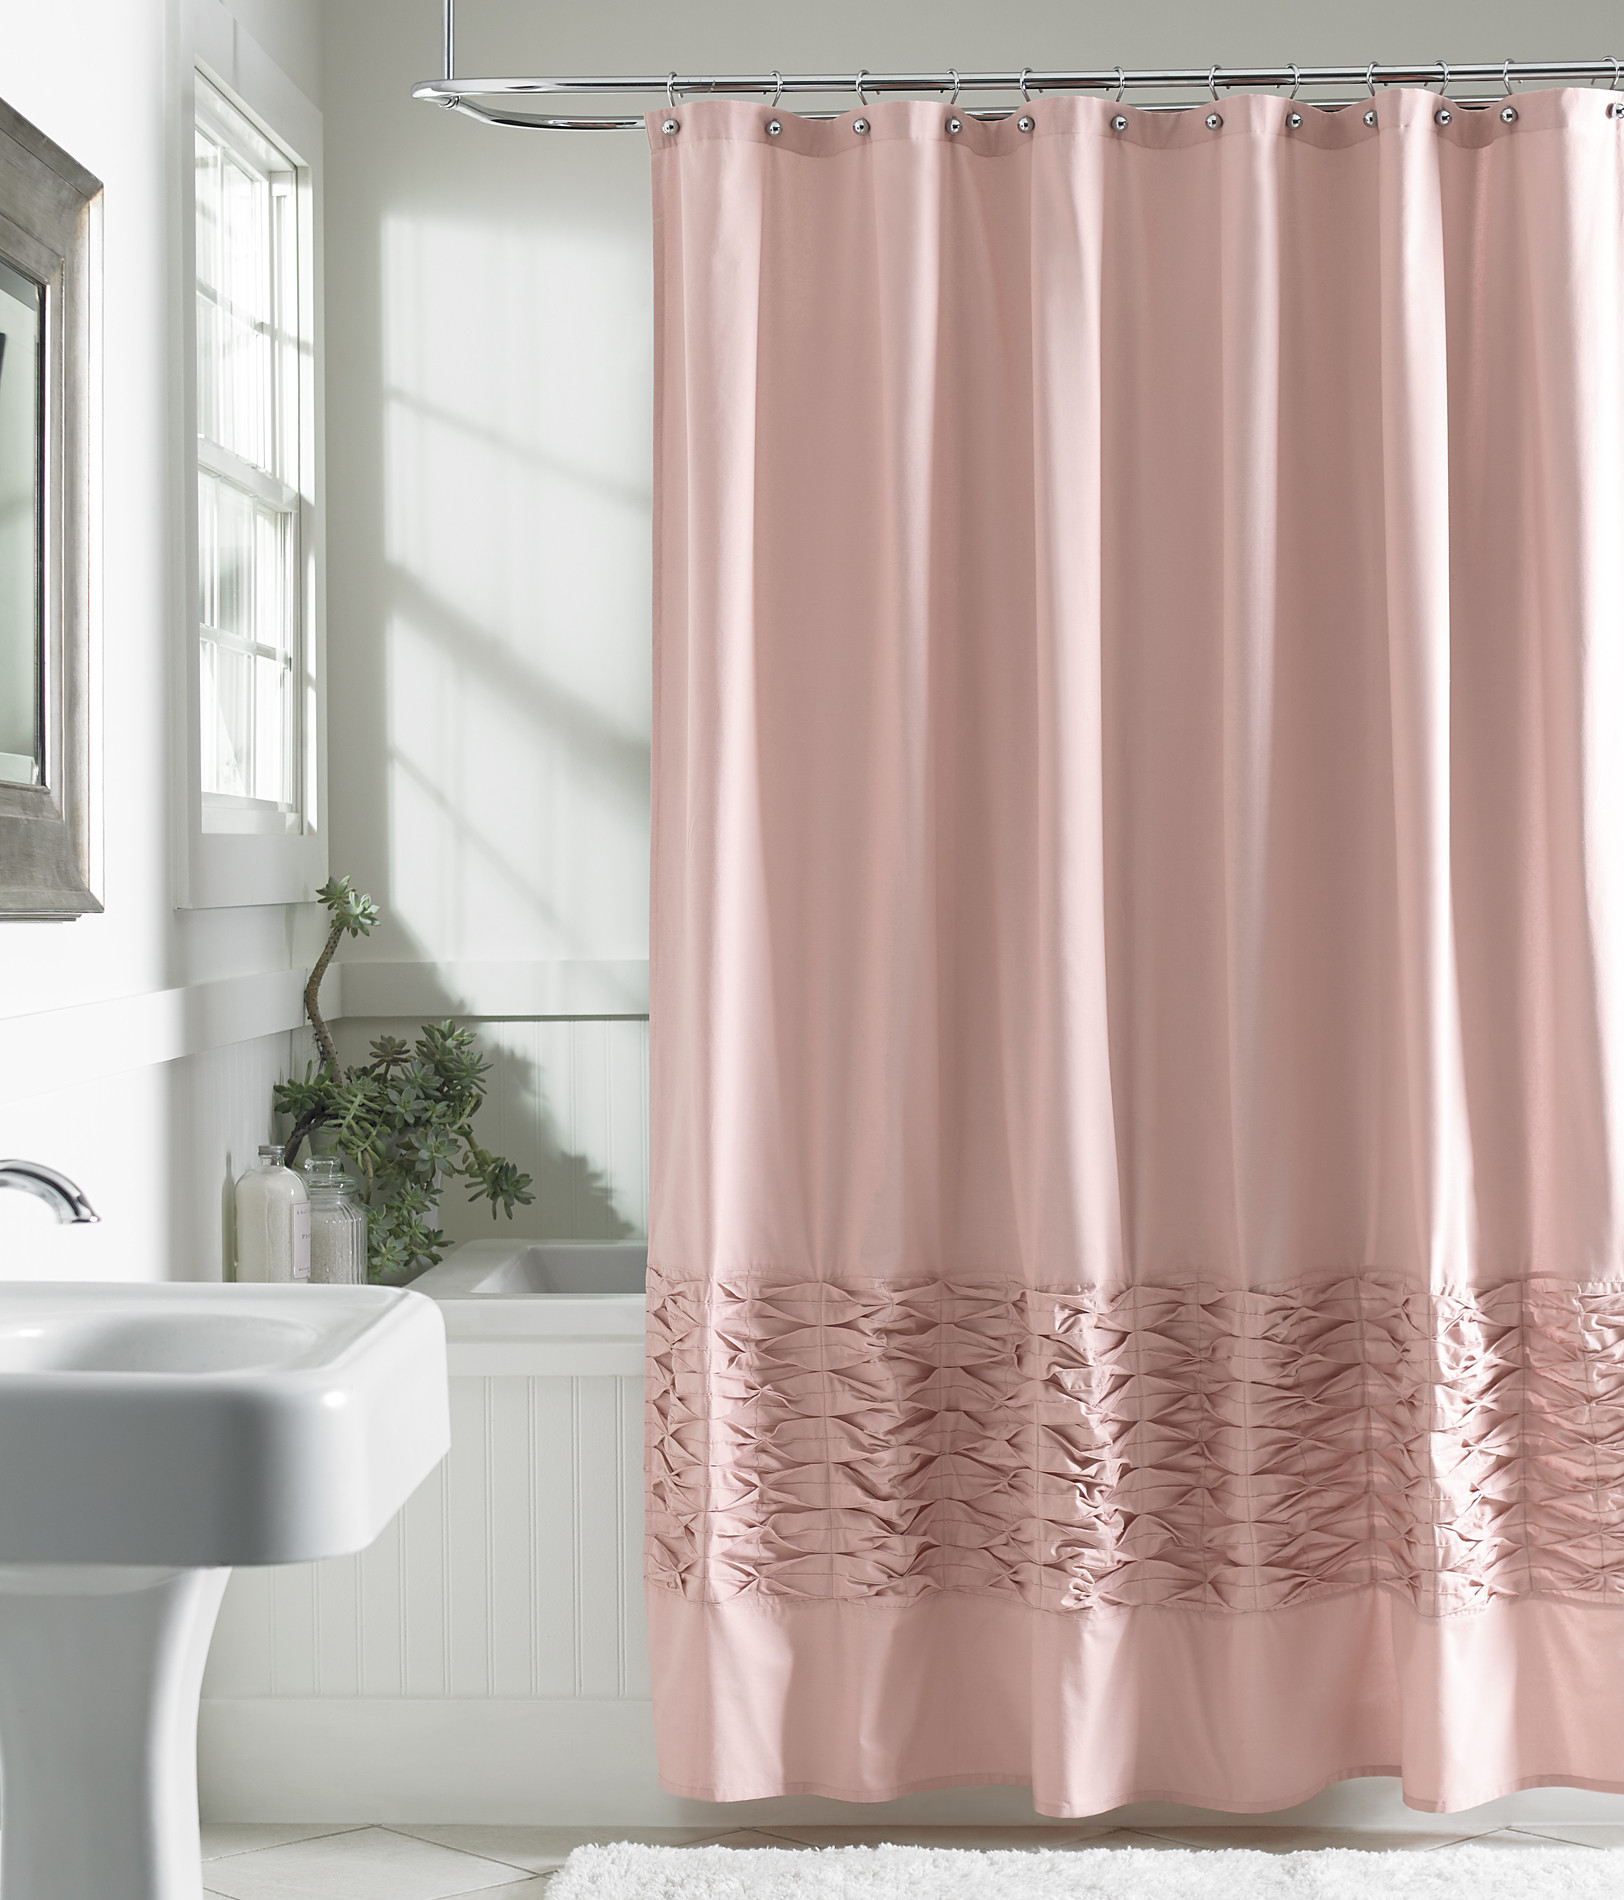 Bathroom Shower Curtains
 Attention Fabric Shower Curtain Blush Home Bed